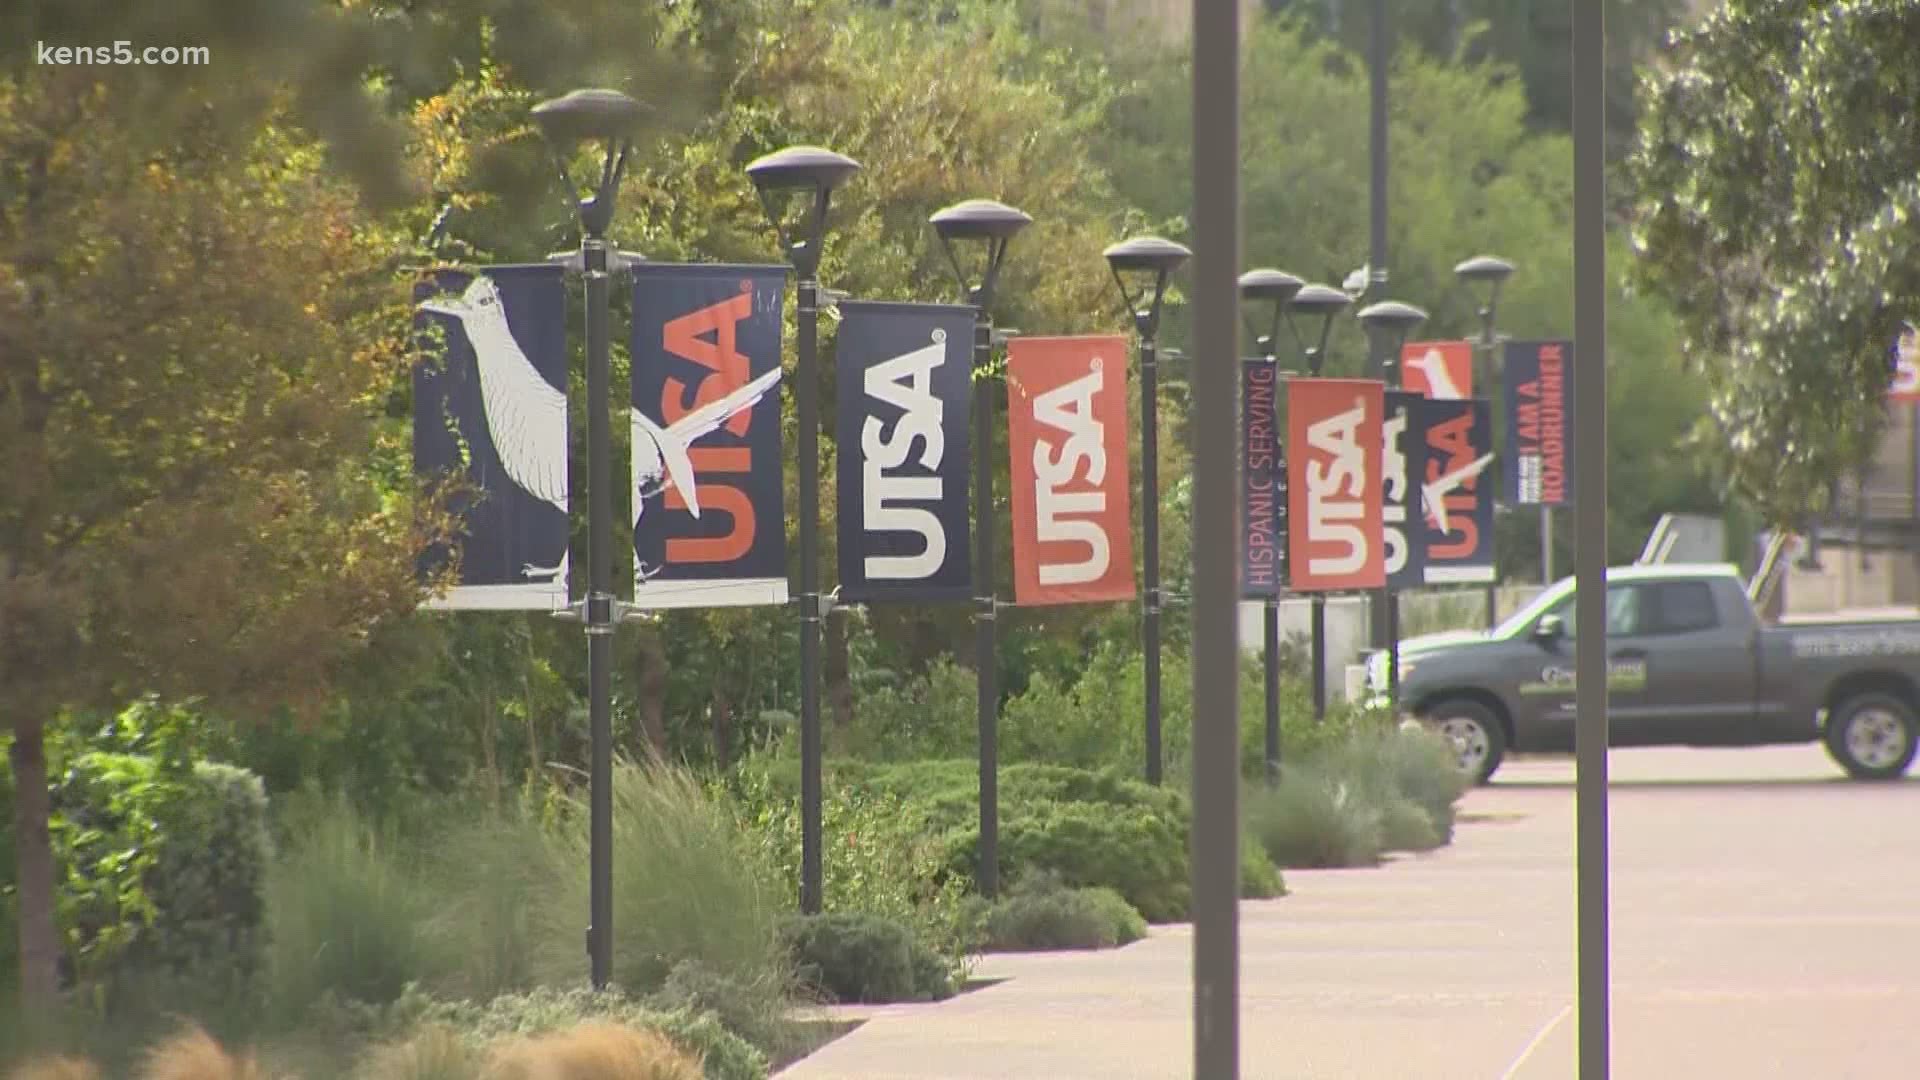 UTSA said Harvey Najim committed $3 million for the the Harvey Najim Innovation and Career Advancement Center, which will serve students from all majors.